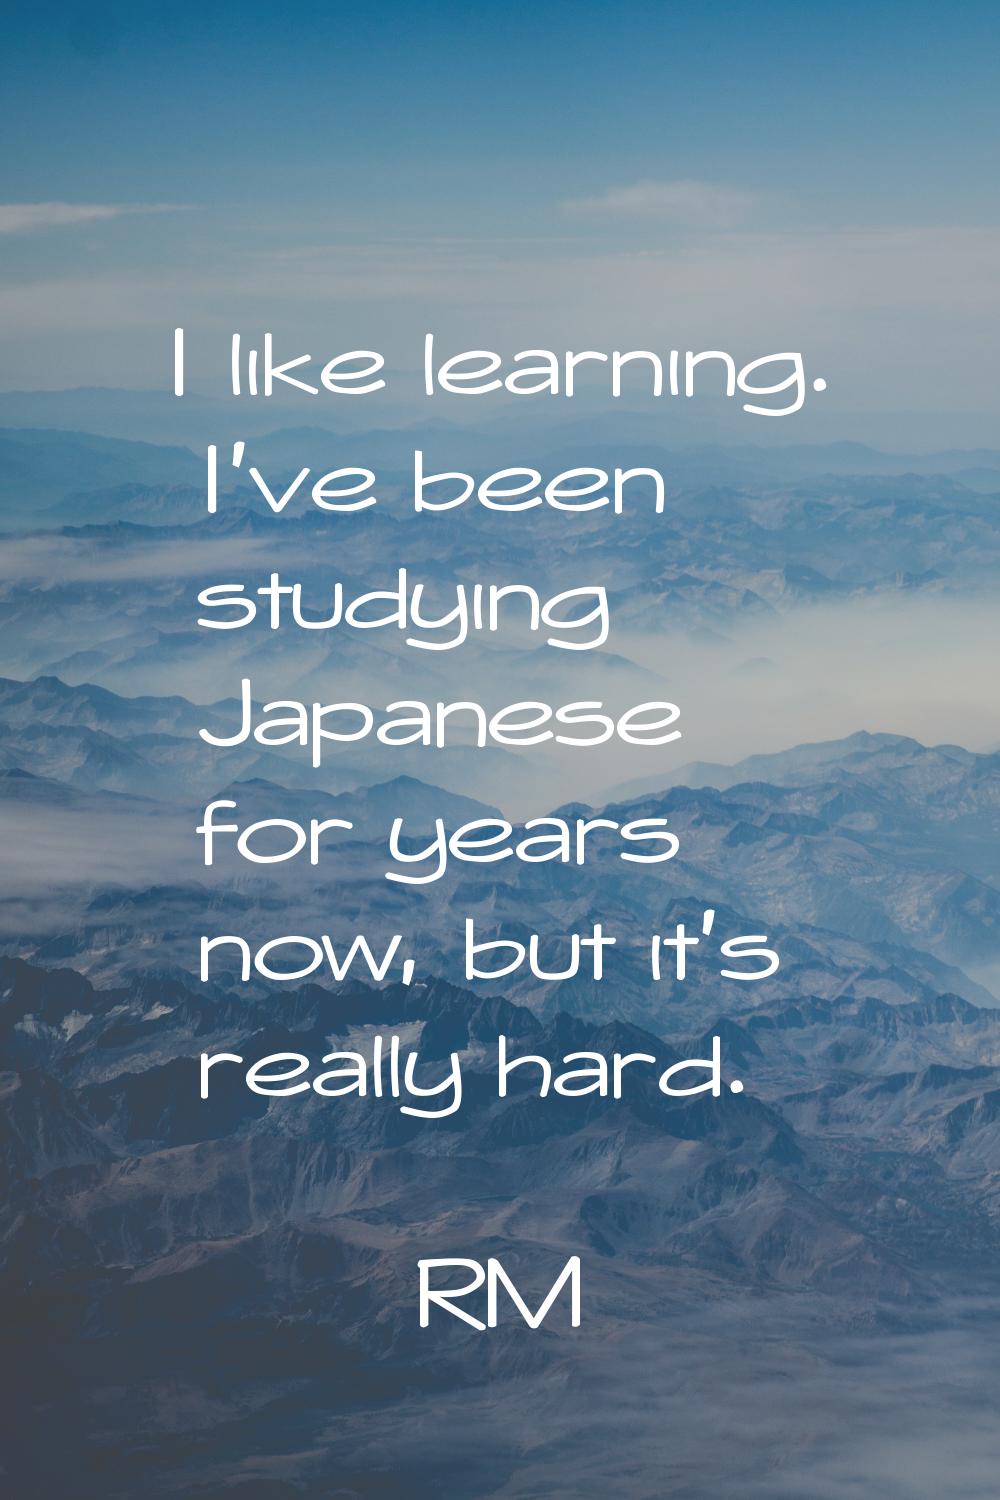 I like learning. I've been studying Japanese for years now, but it's really hard.